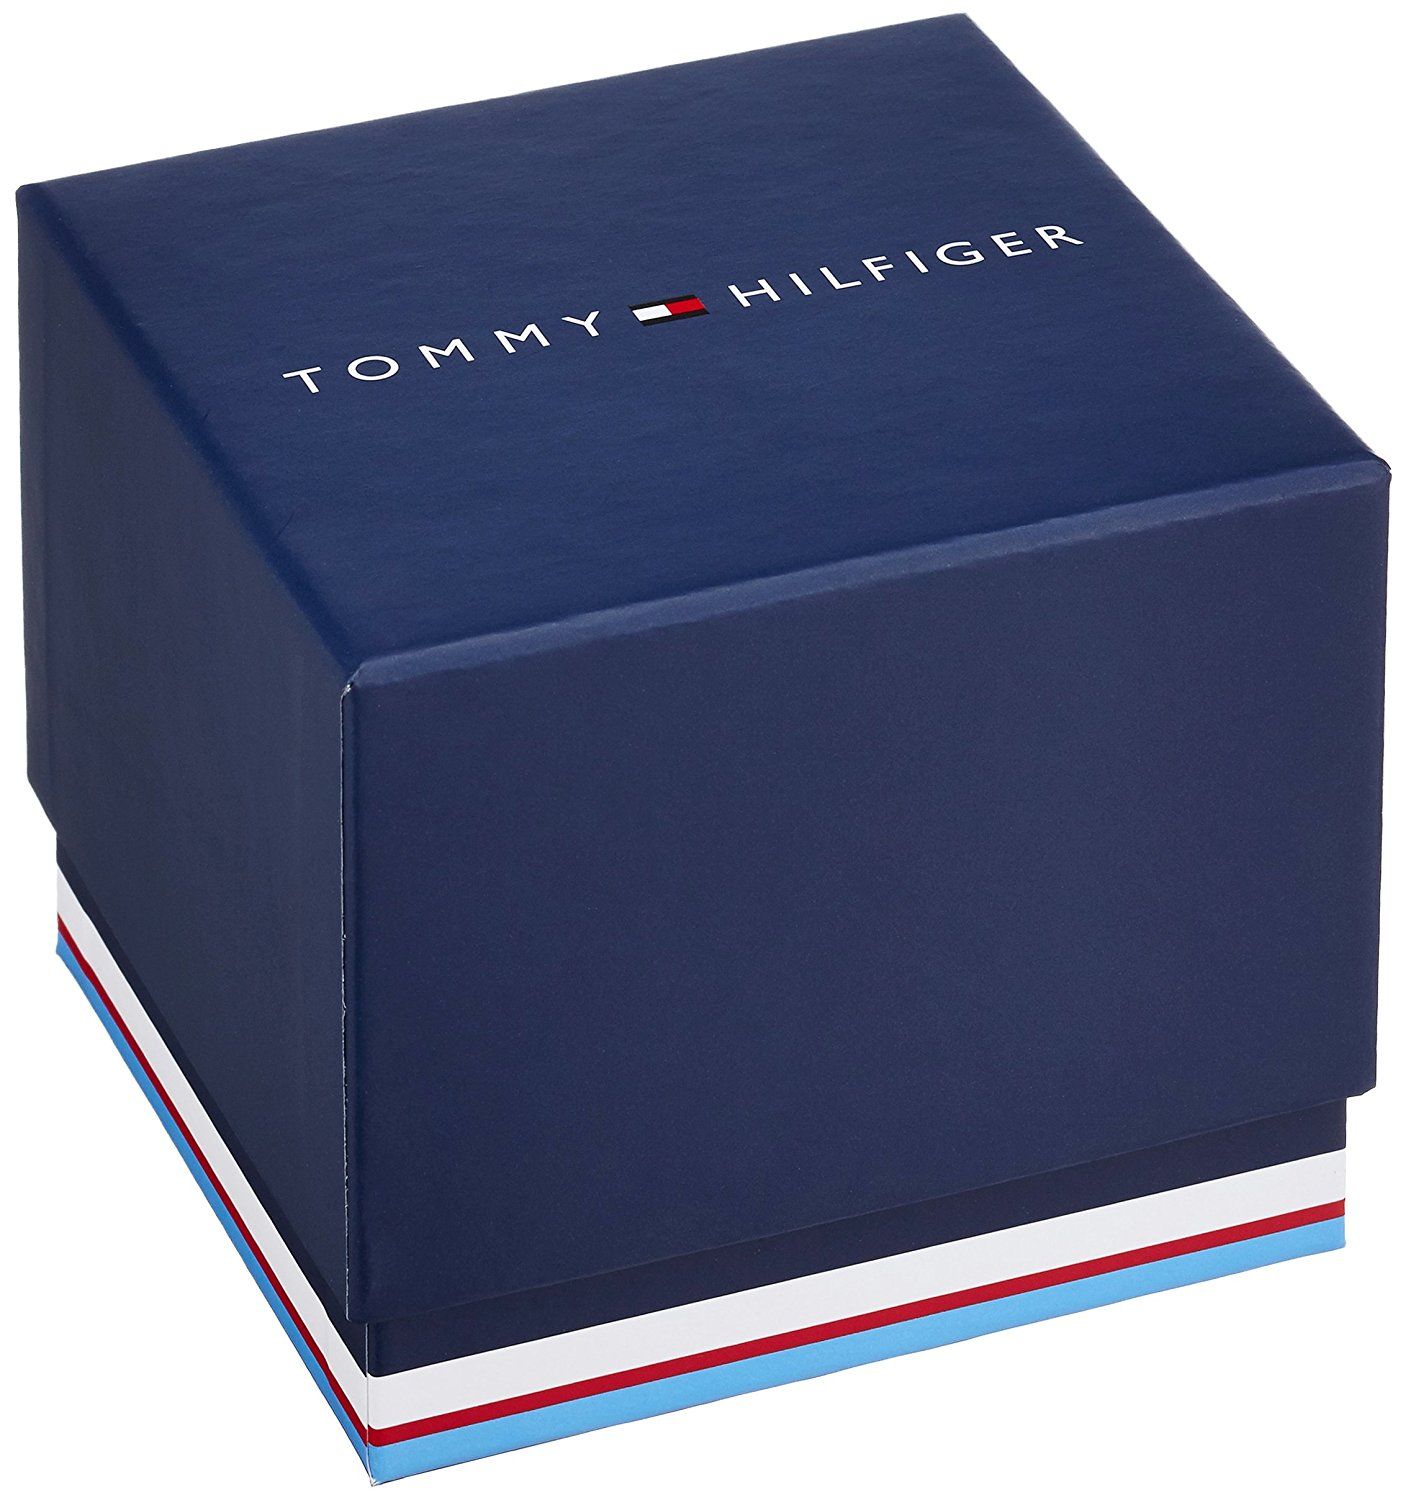 This Tommy Hilfiger Layla Multi Dial Watch for Women is the perfect timepiece to wear or to gift. It's Blue 38 mm Round case combined with the comfortable Blue Stainless steel watch band will ensure you enjoy this stunning timepiece without any compromise. Operated by a high quality Quartz movement and water resistant to 3 bars, your watch will keep ticking. This watch is suitable for every occasion,whether you are at work, leisure or at the banquet and so on -The watch has a calendar function: Day-Date, 24-hour Display High quality 19 cm length and 17 mm width Blue Stainless steel strap with a Fold over clasp Case diameter: 38 mm,case thickness: 10 mm, case colour: Blue and dial colour: Blue